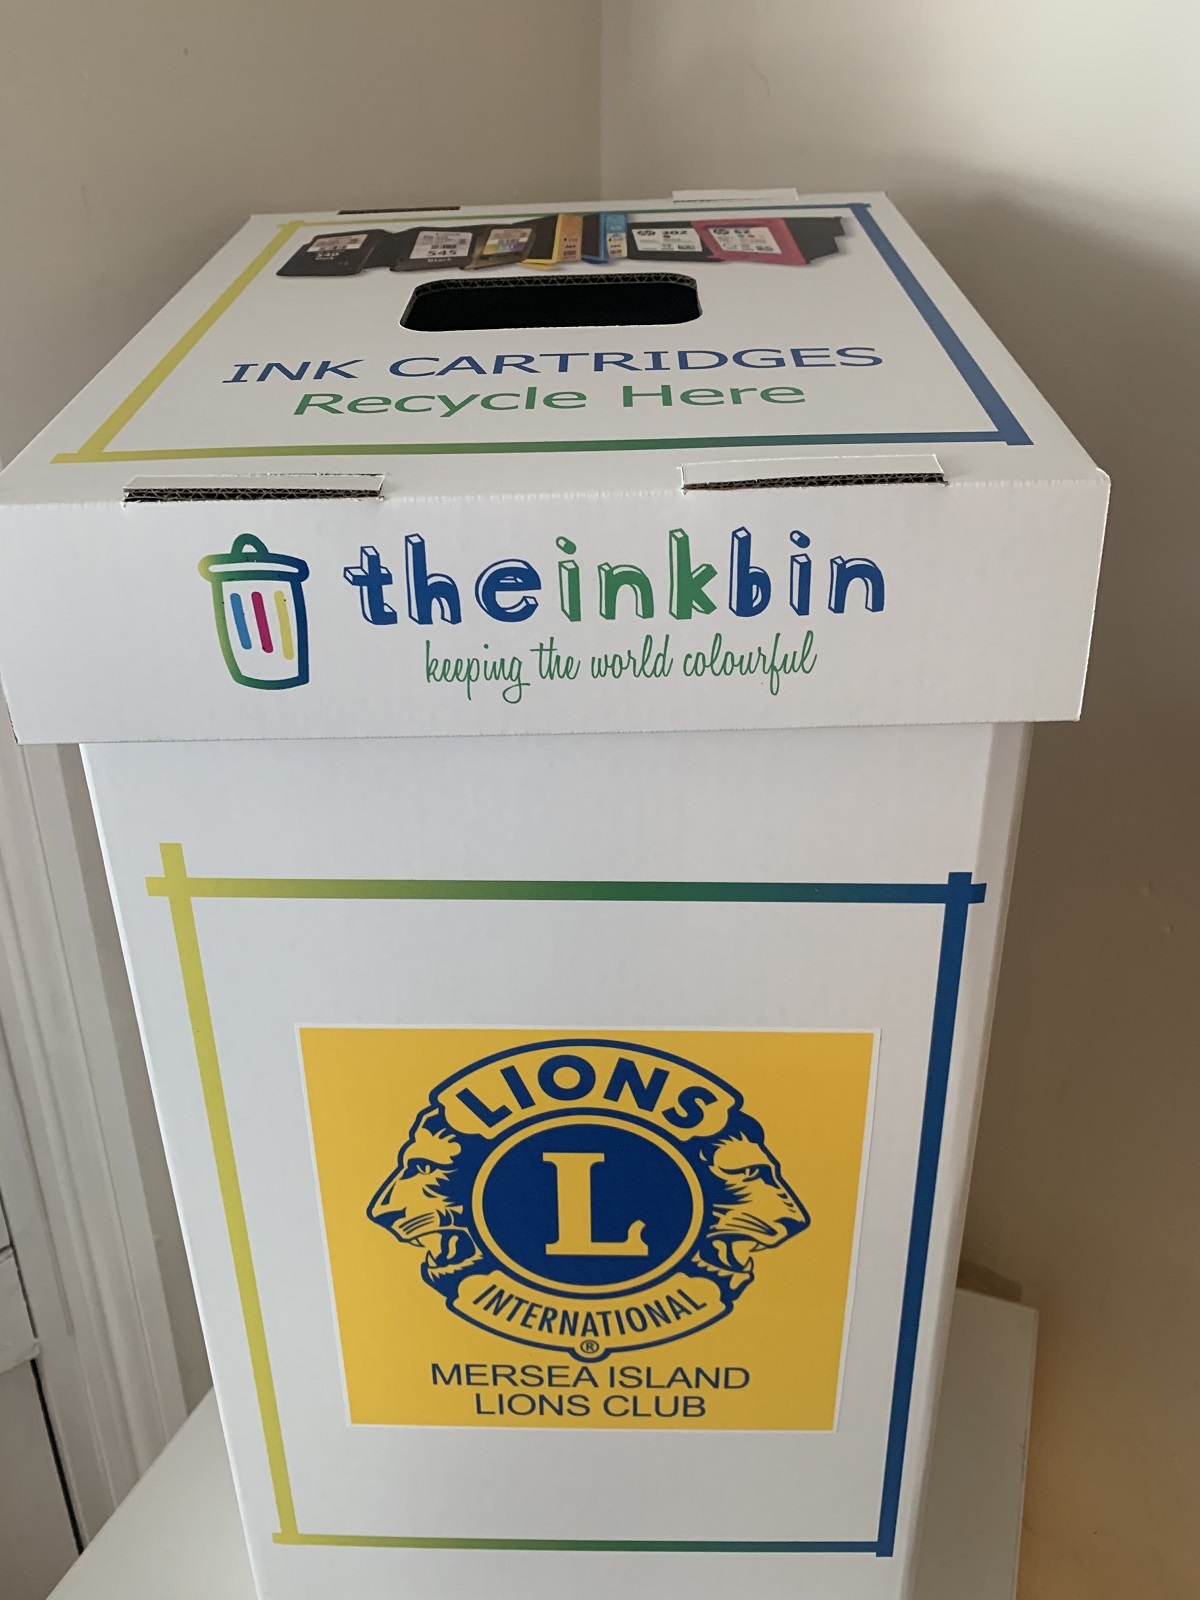 Drop-off point - The Ink Bin box for recycling ink cartridges, in support of Mersea Island Lions Club, located at West Mersea Co-op